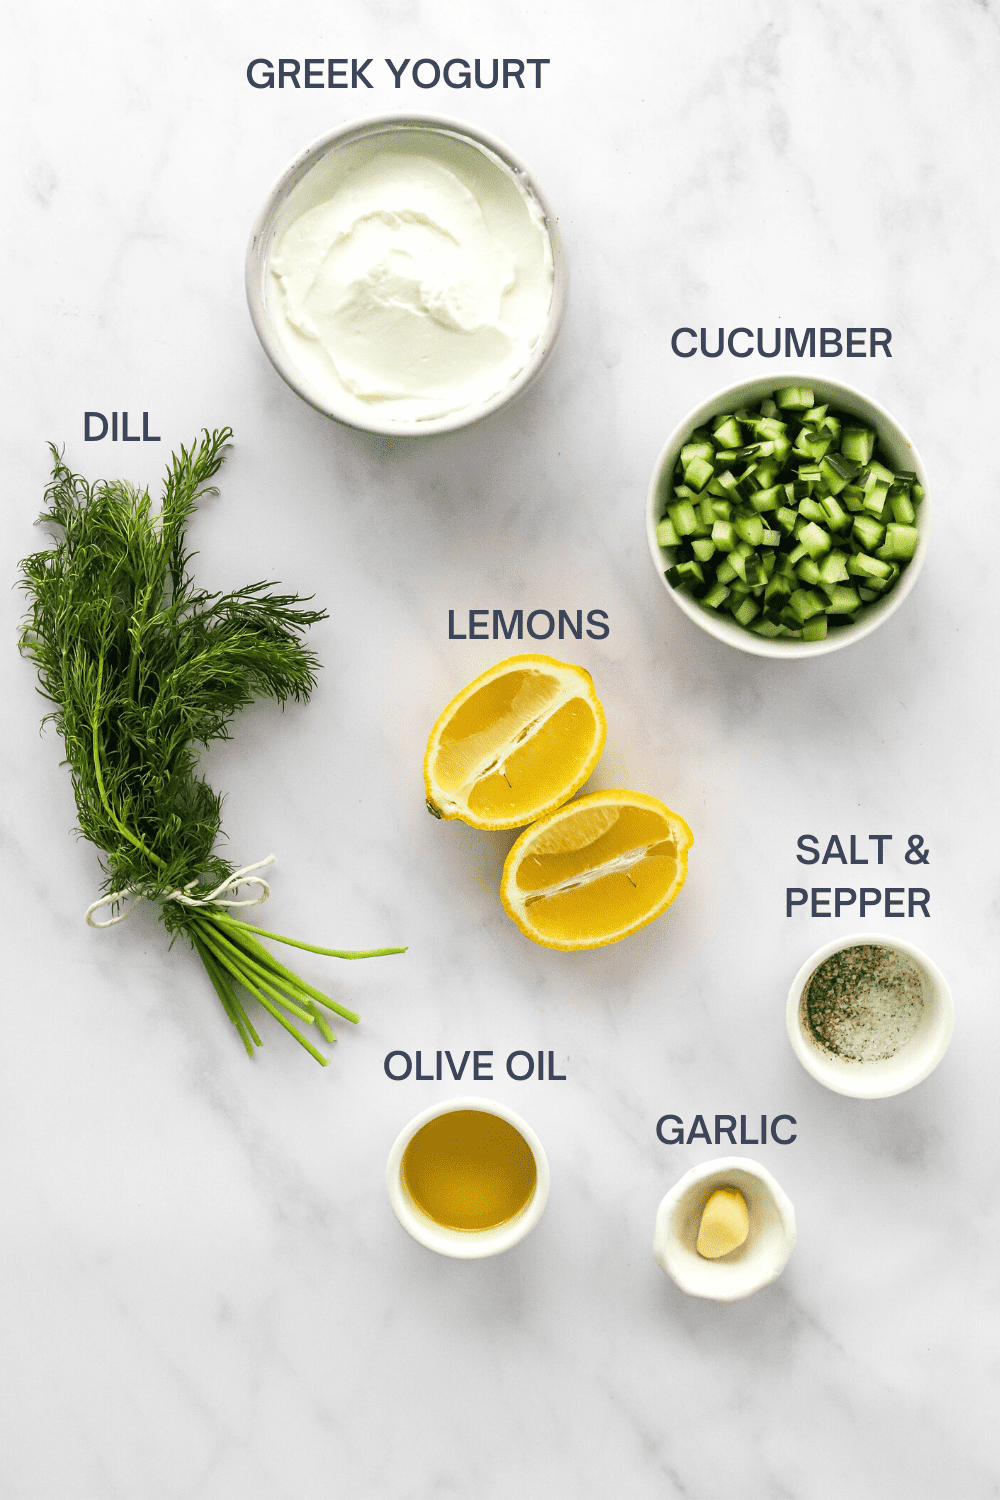 Bowl of plain greek Yogurt with a bunch of dill, bowl of diced cucumber, sliced lemon, small bowl of olive oil, garlic clove, salt and pepper in front of it. 